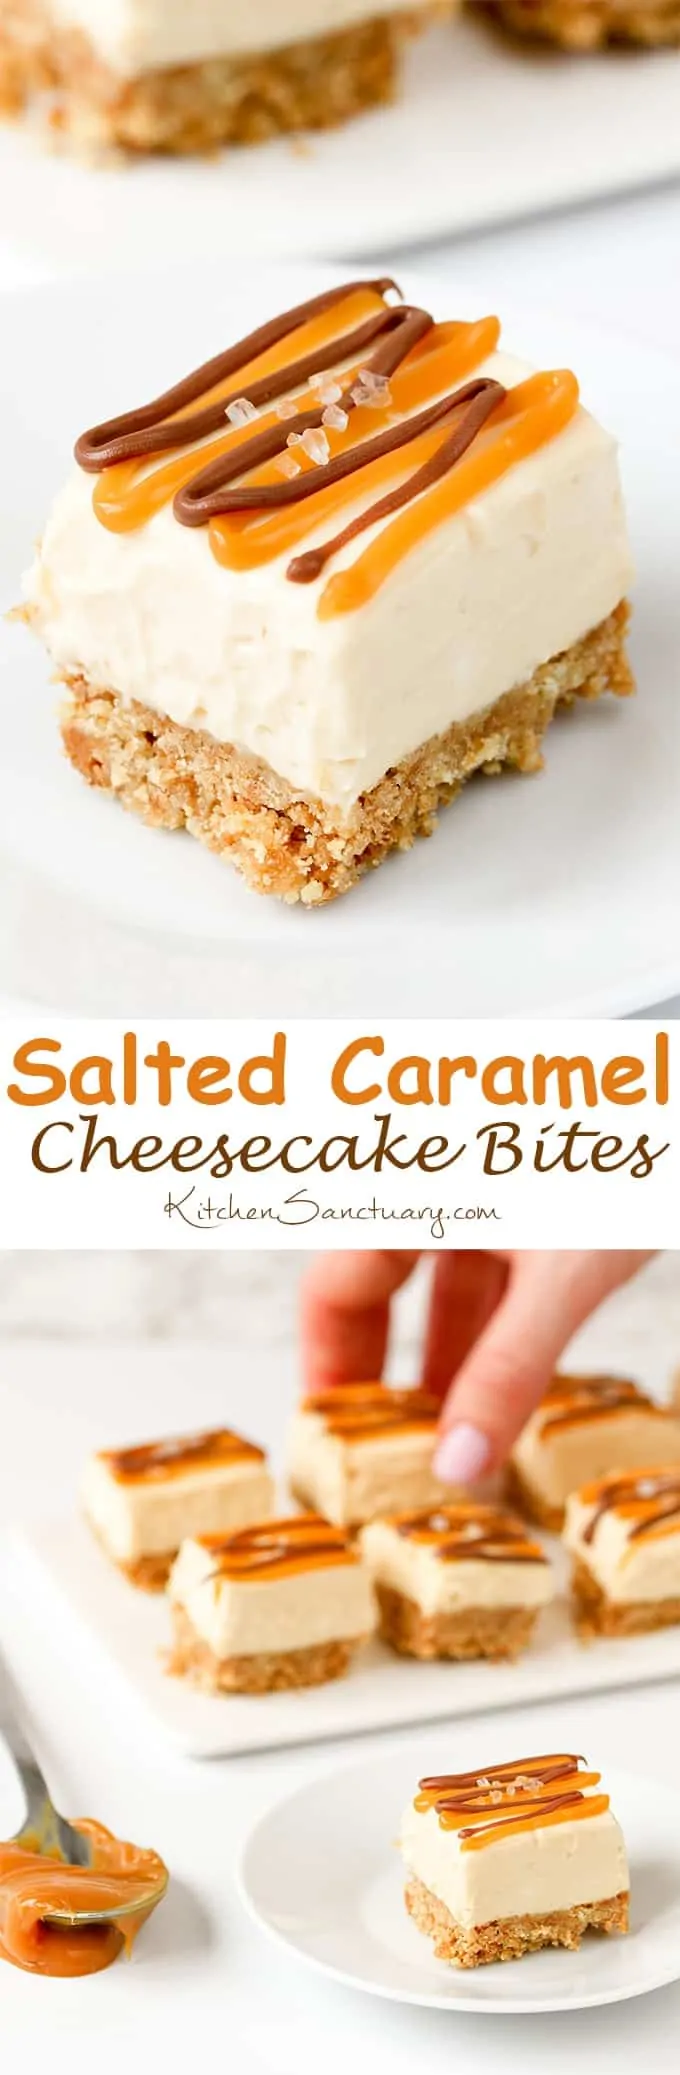 No-bake Salted Caramel Cheesecake bites - great for parties!